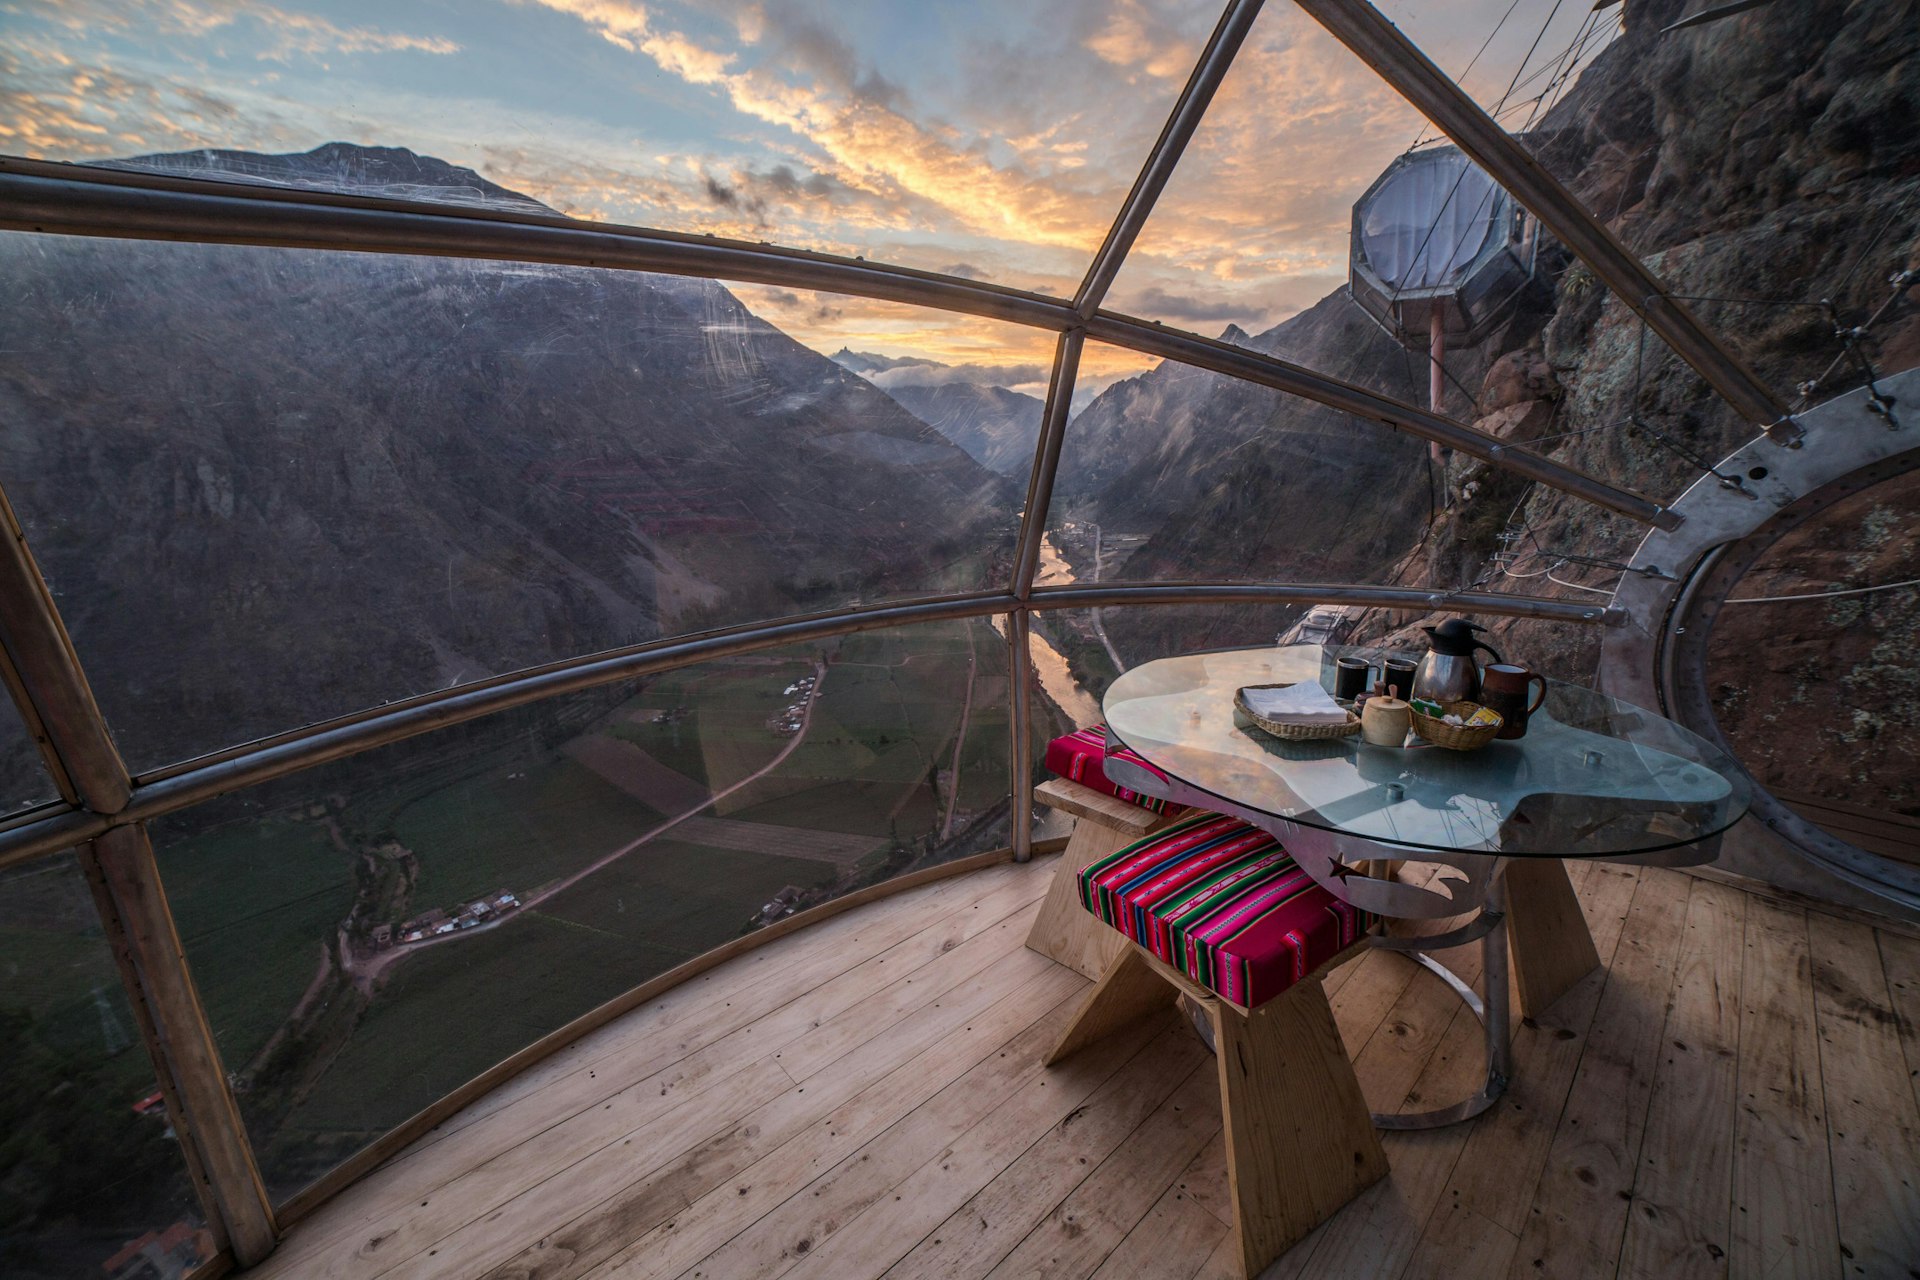 The experience includes breakfast with unbeatable views.